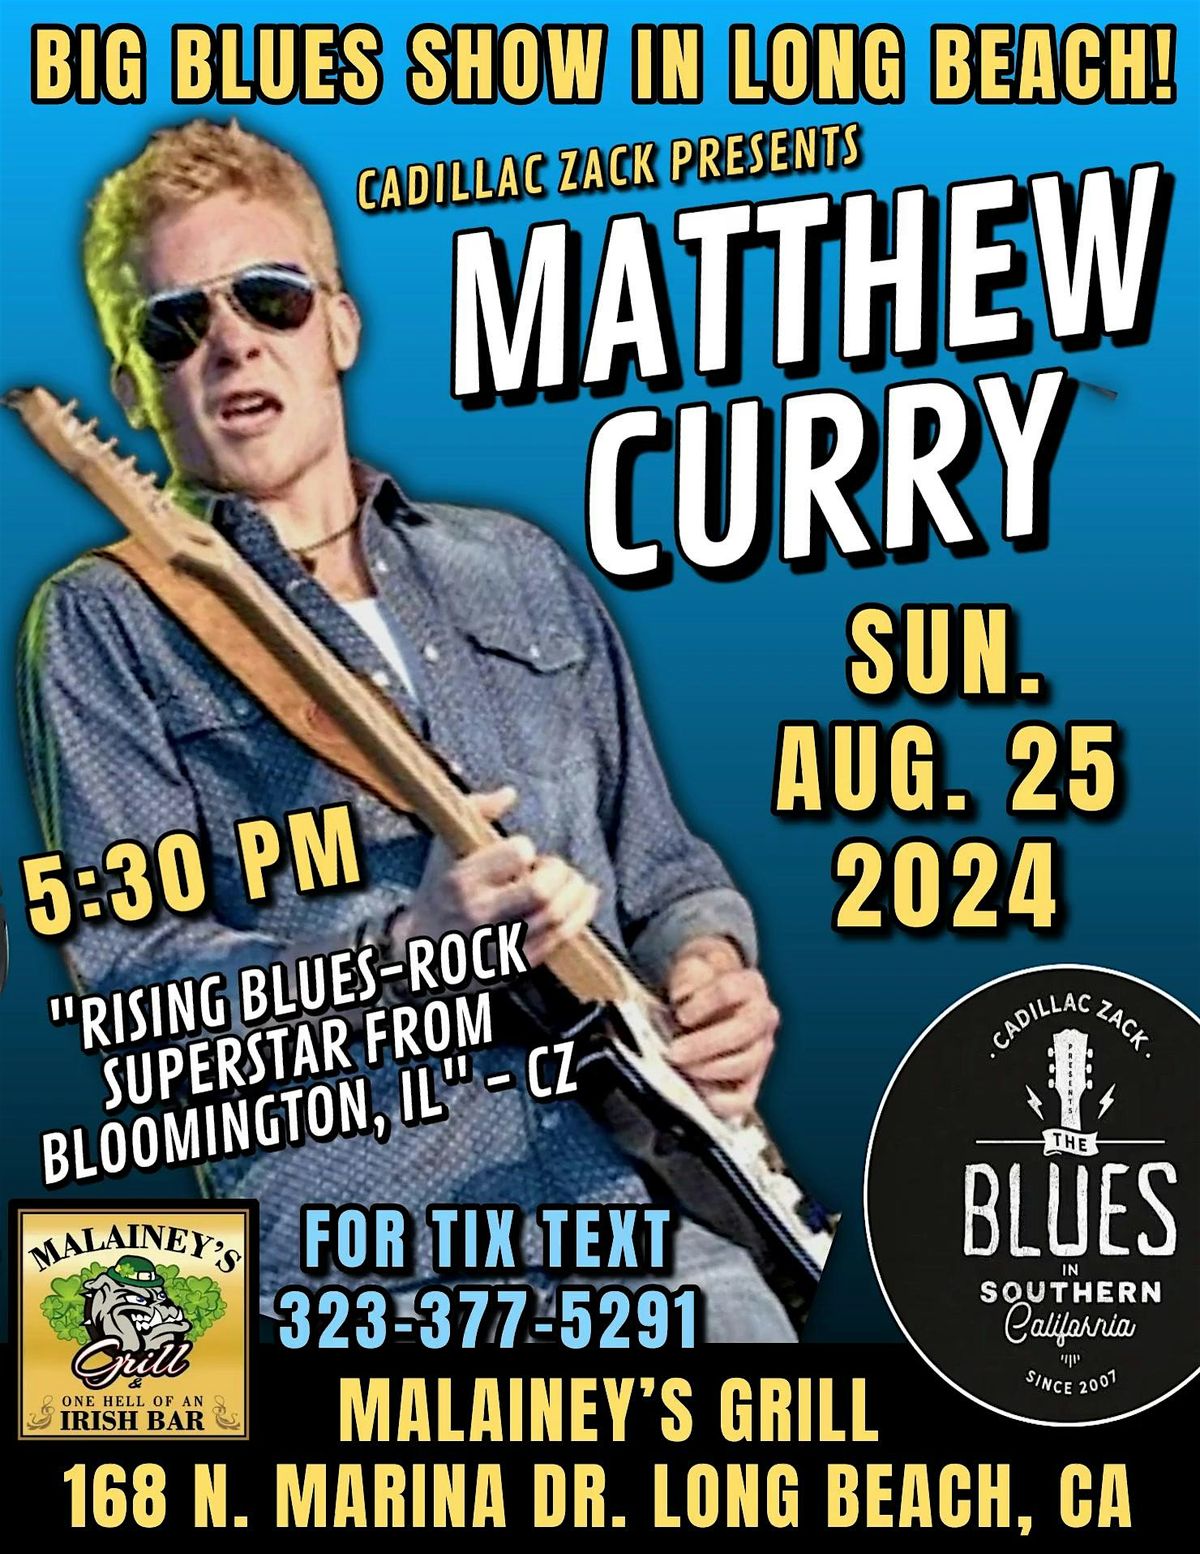 MATTHEW CURRY - Young Blues-Rock Phenom from Bloomington, IL in LONG BEACH!